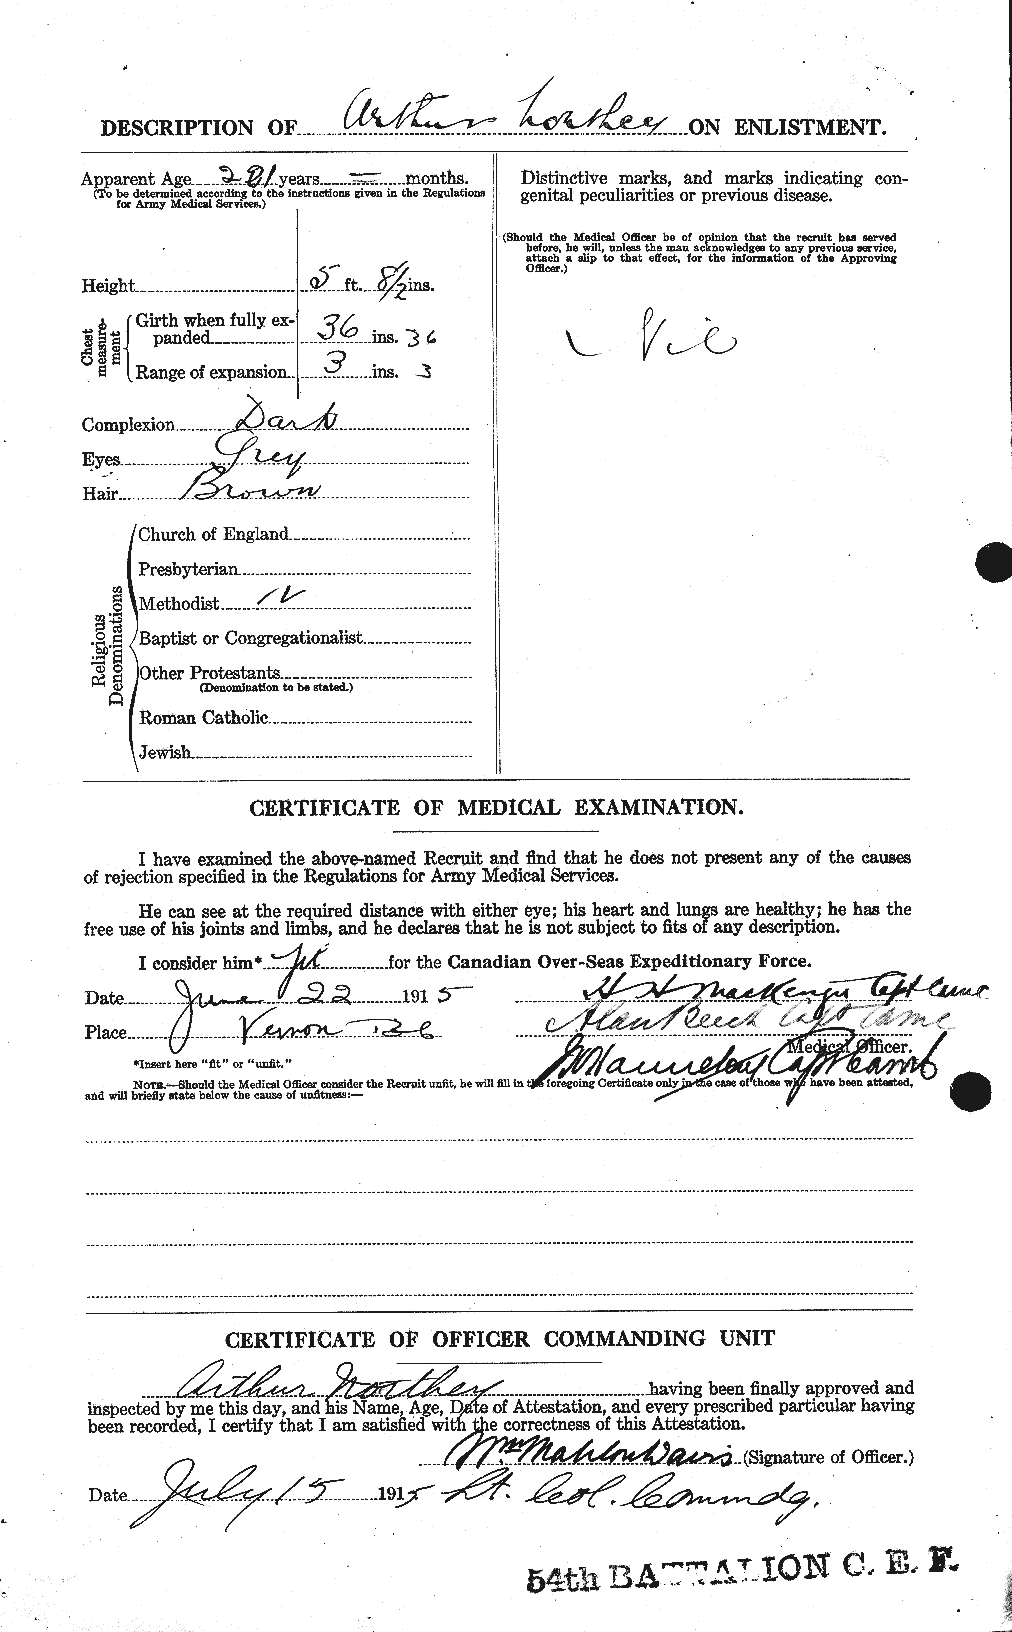 Personnel Records of the First World War - CEF 551668b